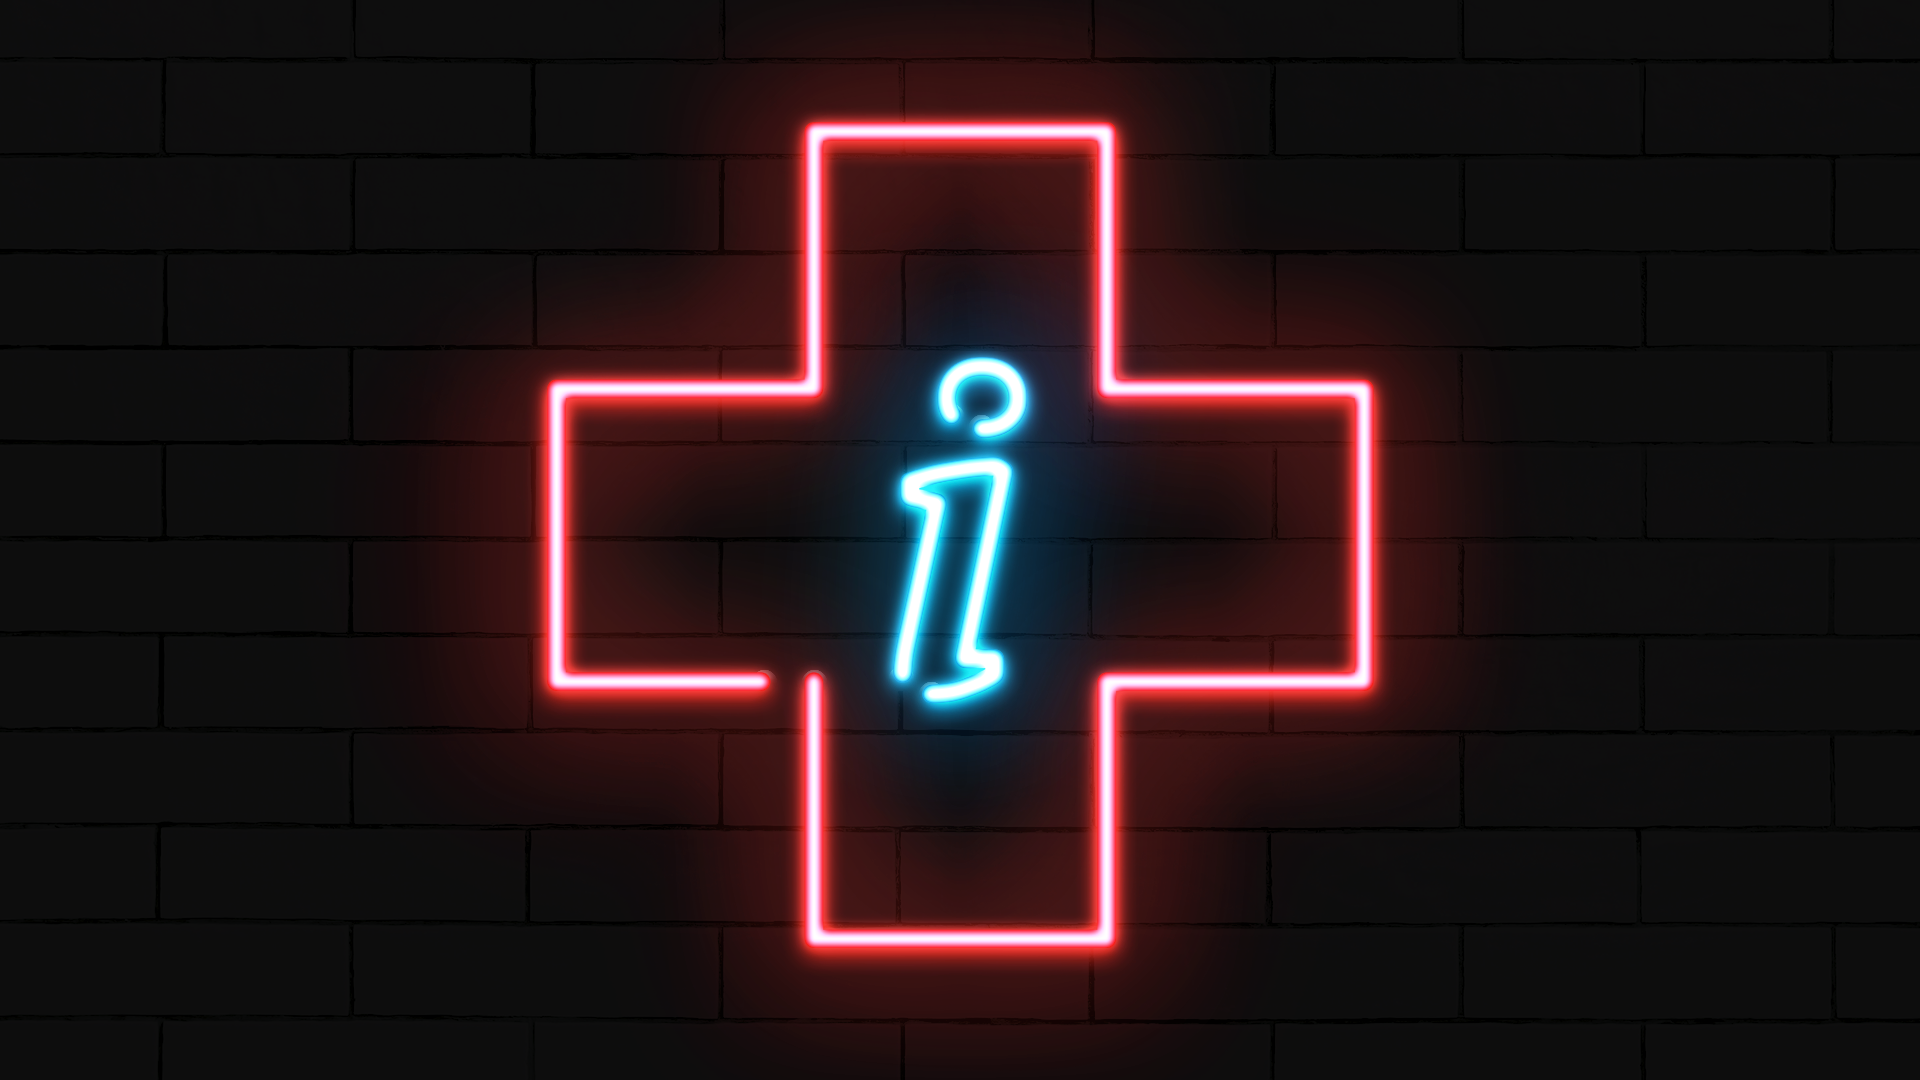 Illustration of a neon sign in the shape of a health plus with an information "i" in the center.